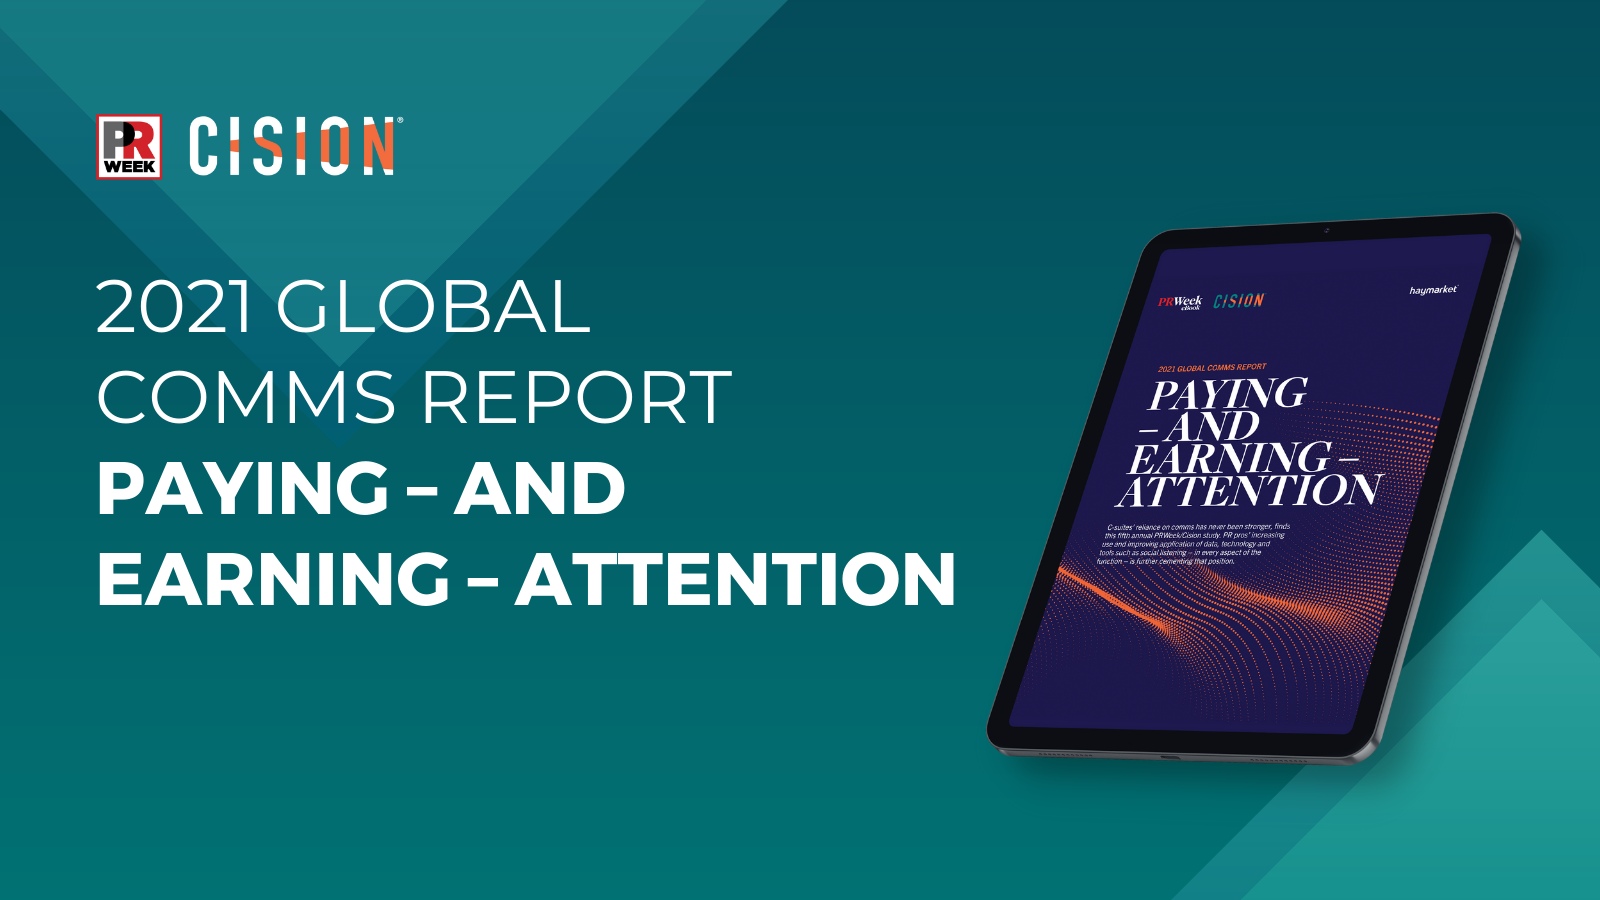 5 Lessons from the 2021 Global Comms Report